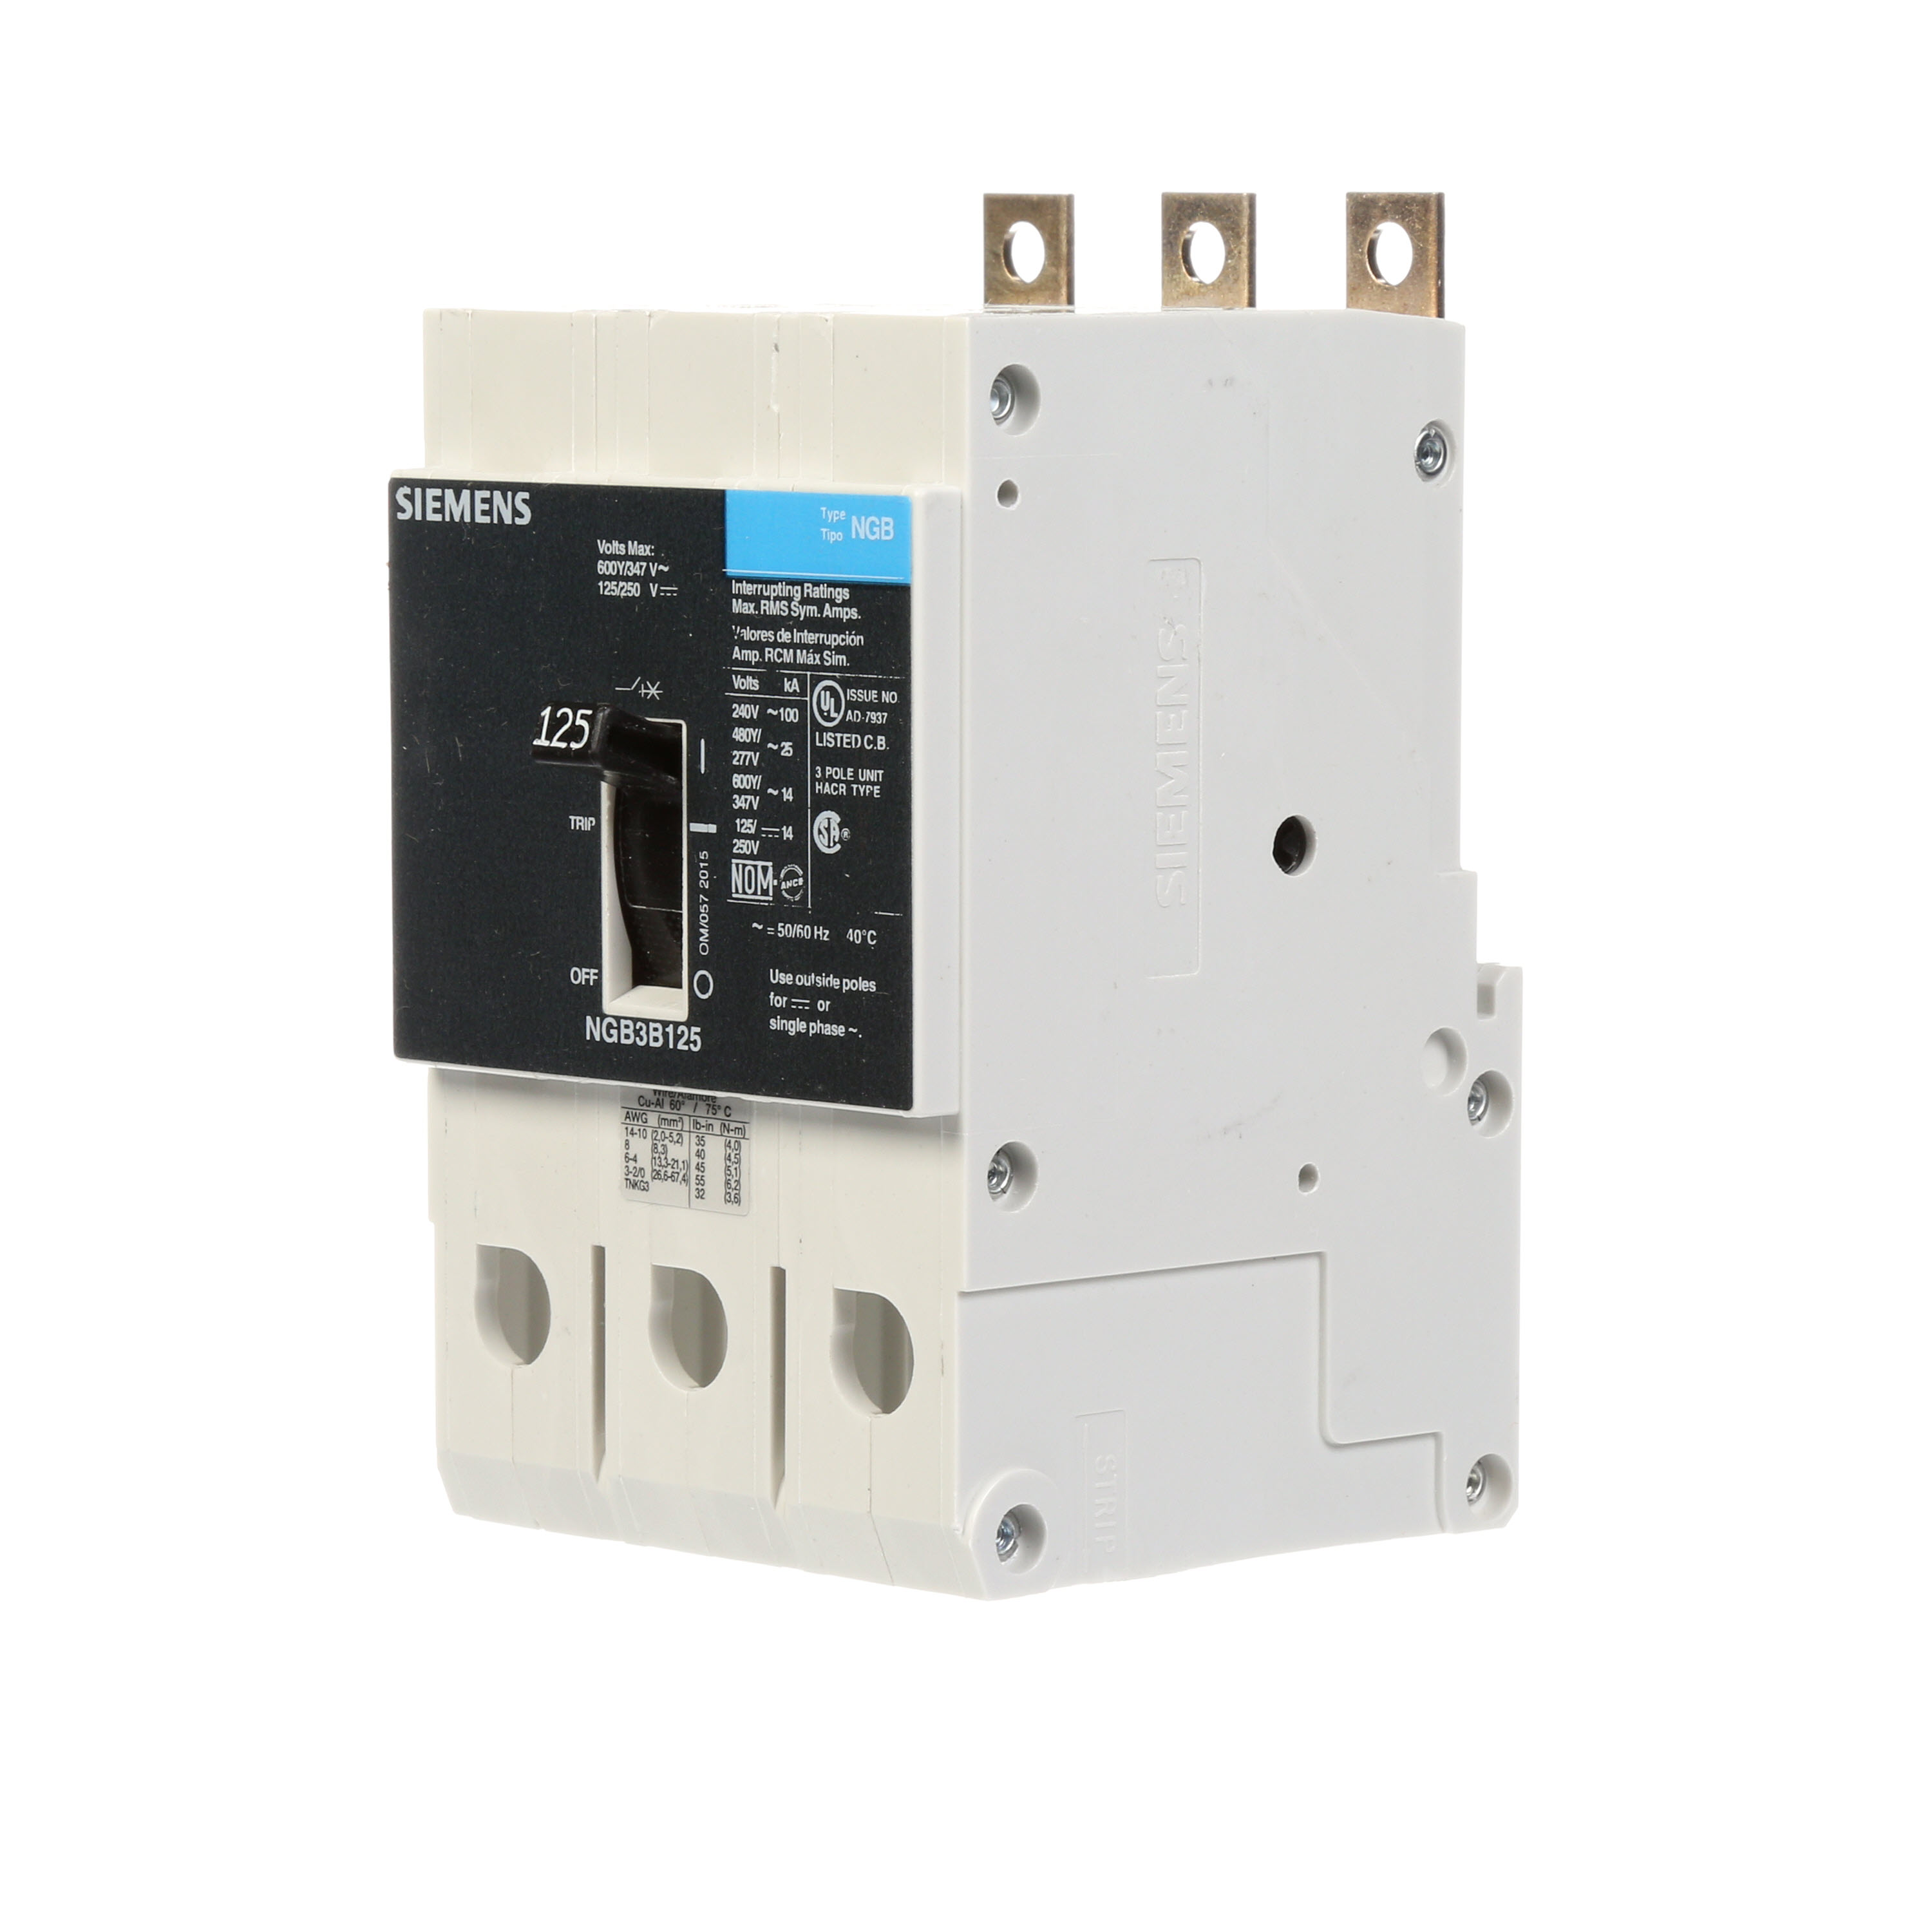 SIEMENS LOW VOLTAGE PANELBOARD MOUNT G FRAME CIRCUIT BREAKER WITH THERMAL - MAGNETIC TRIP. UL LISTED NGB FRAME WITH STANDARD BREAKING CAPACITY. 125A 3-POLE (14KAIC AT 600Y/347V) (25KAIC AT 480Y/277V). SPECIAL FEATURES MOUNTS ON PANELBOARD,NO LUGS. DIMENSIONS (W x H x D) IN 3 x 5.4 x 2.8.